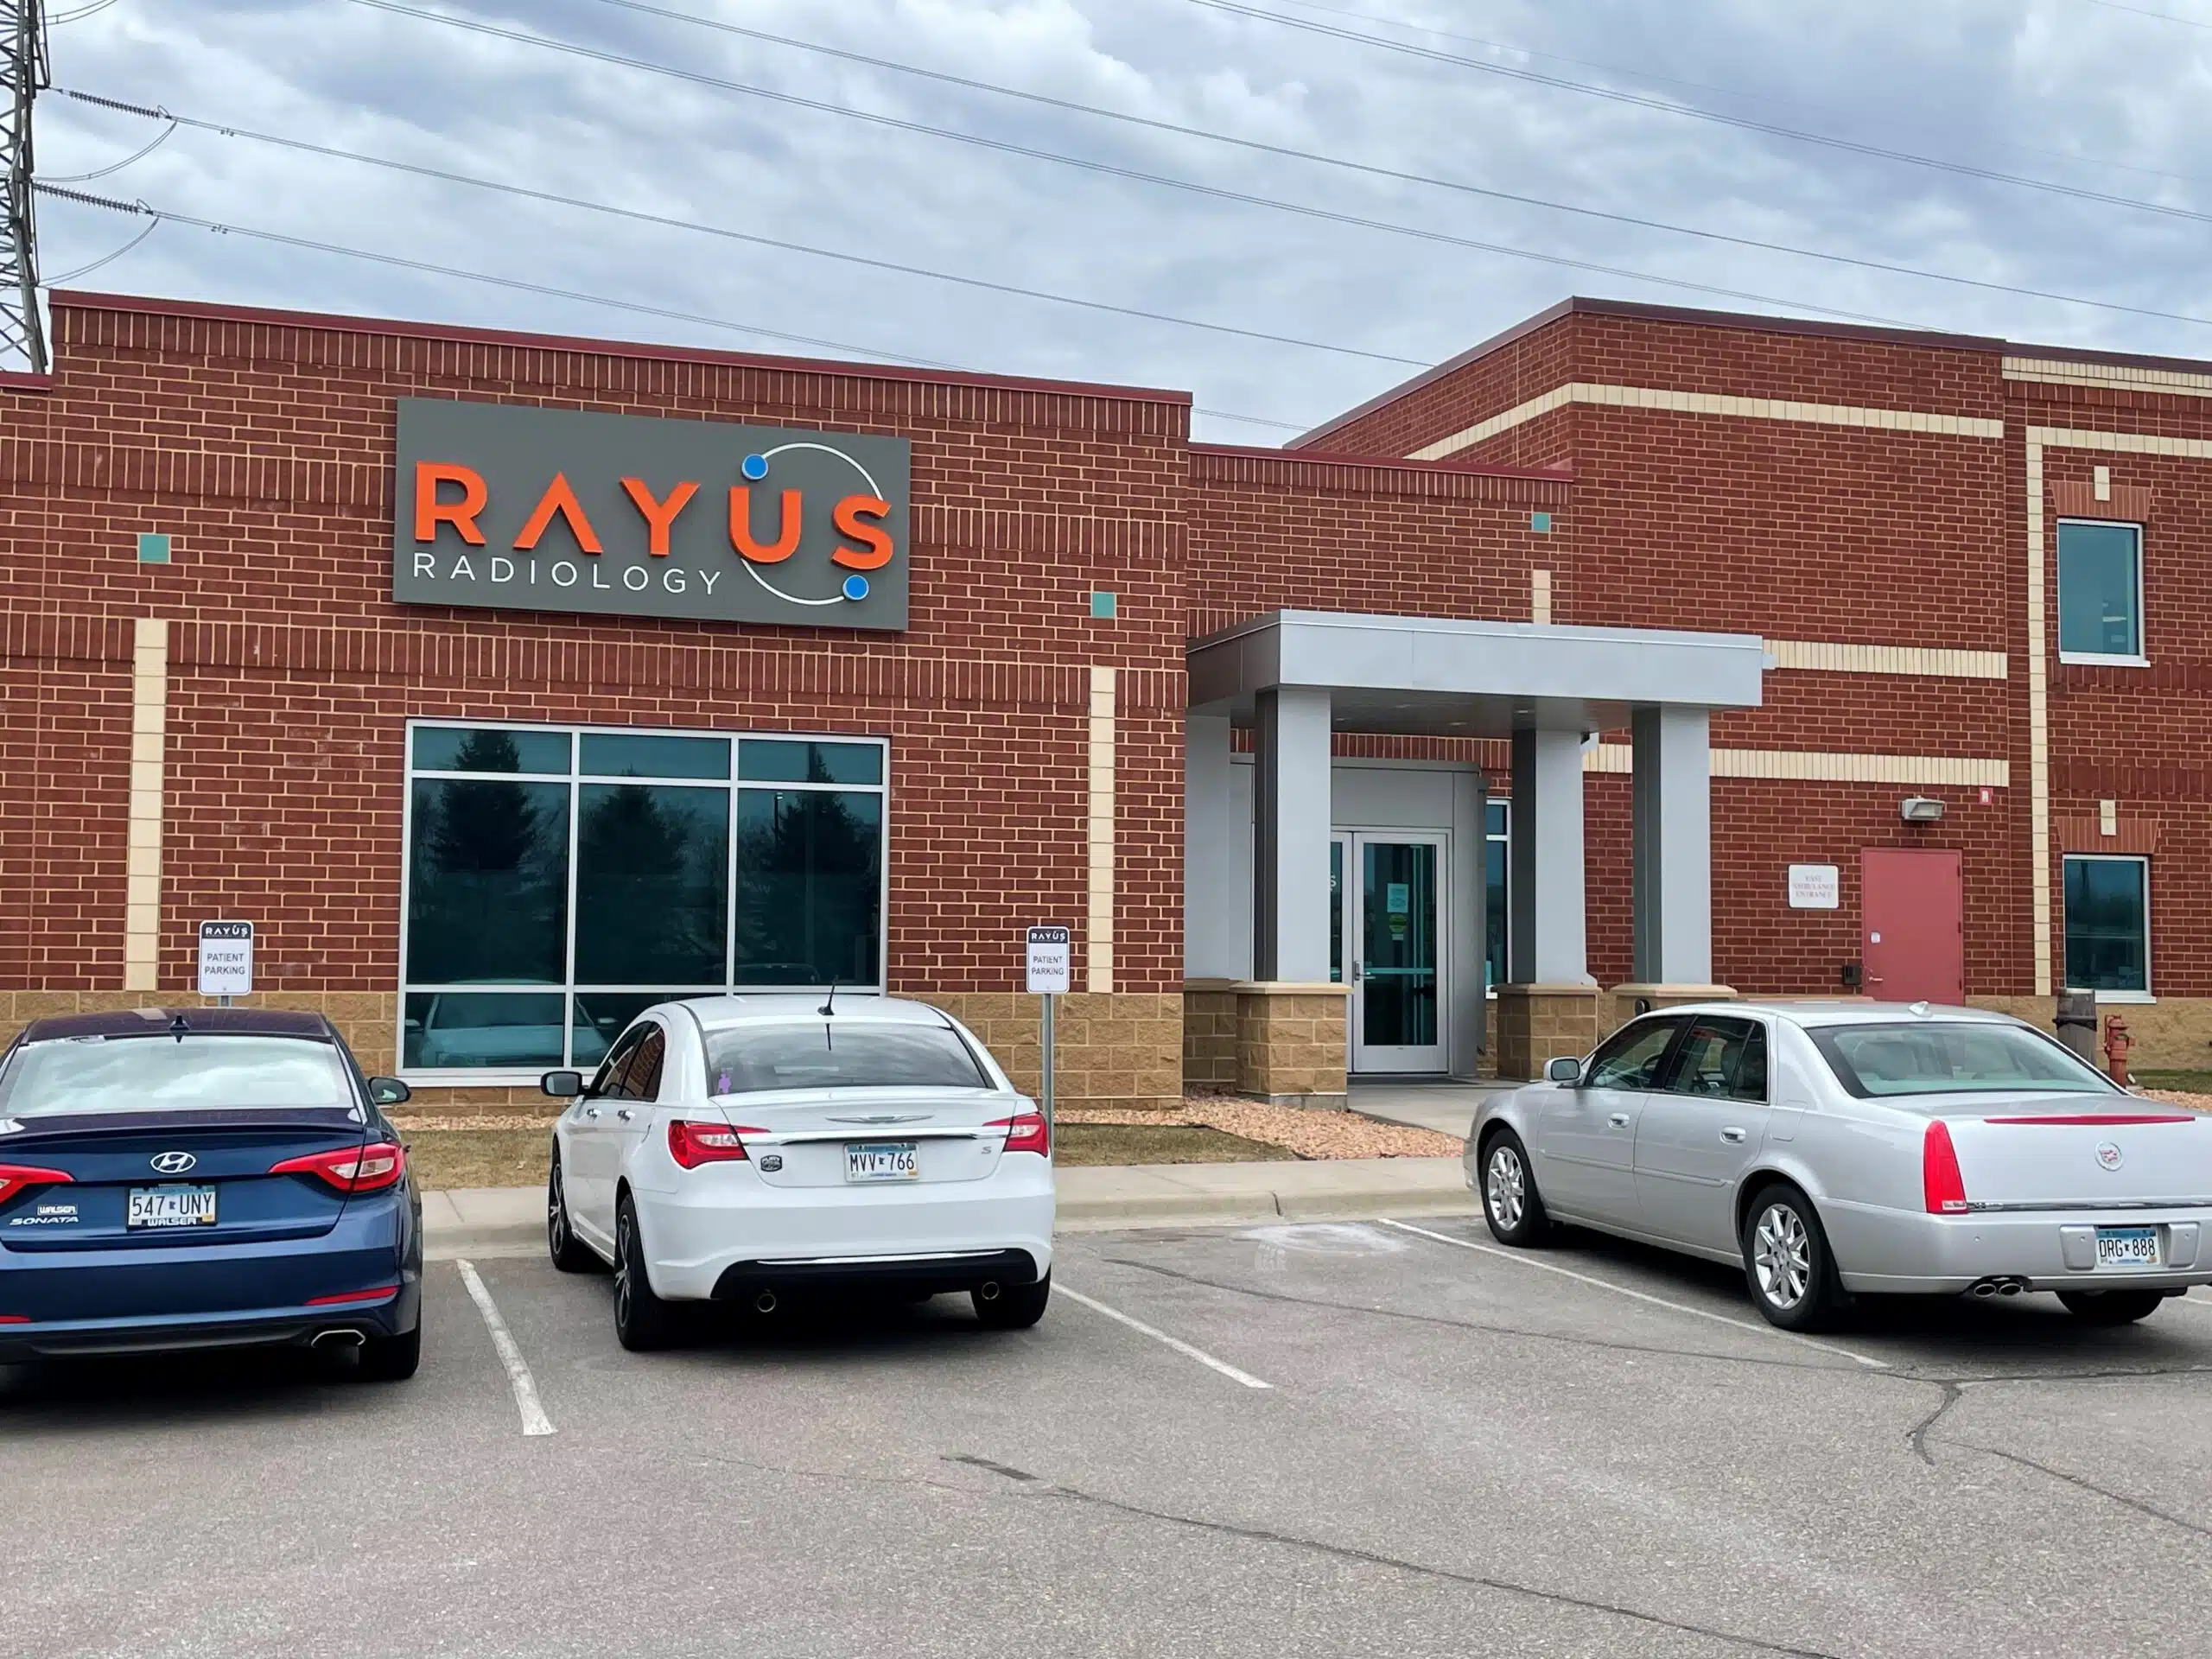 RAYUS Radiology diagnostic imaging center in 1835 W. County Rd. C, Suite 180, Roseville, MN 55113